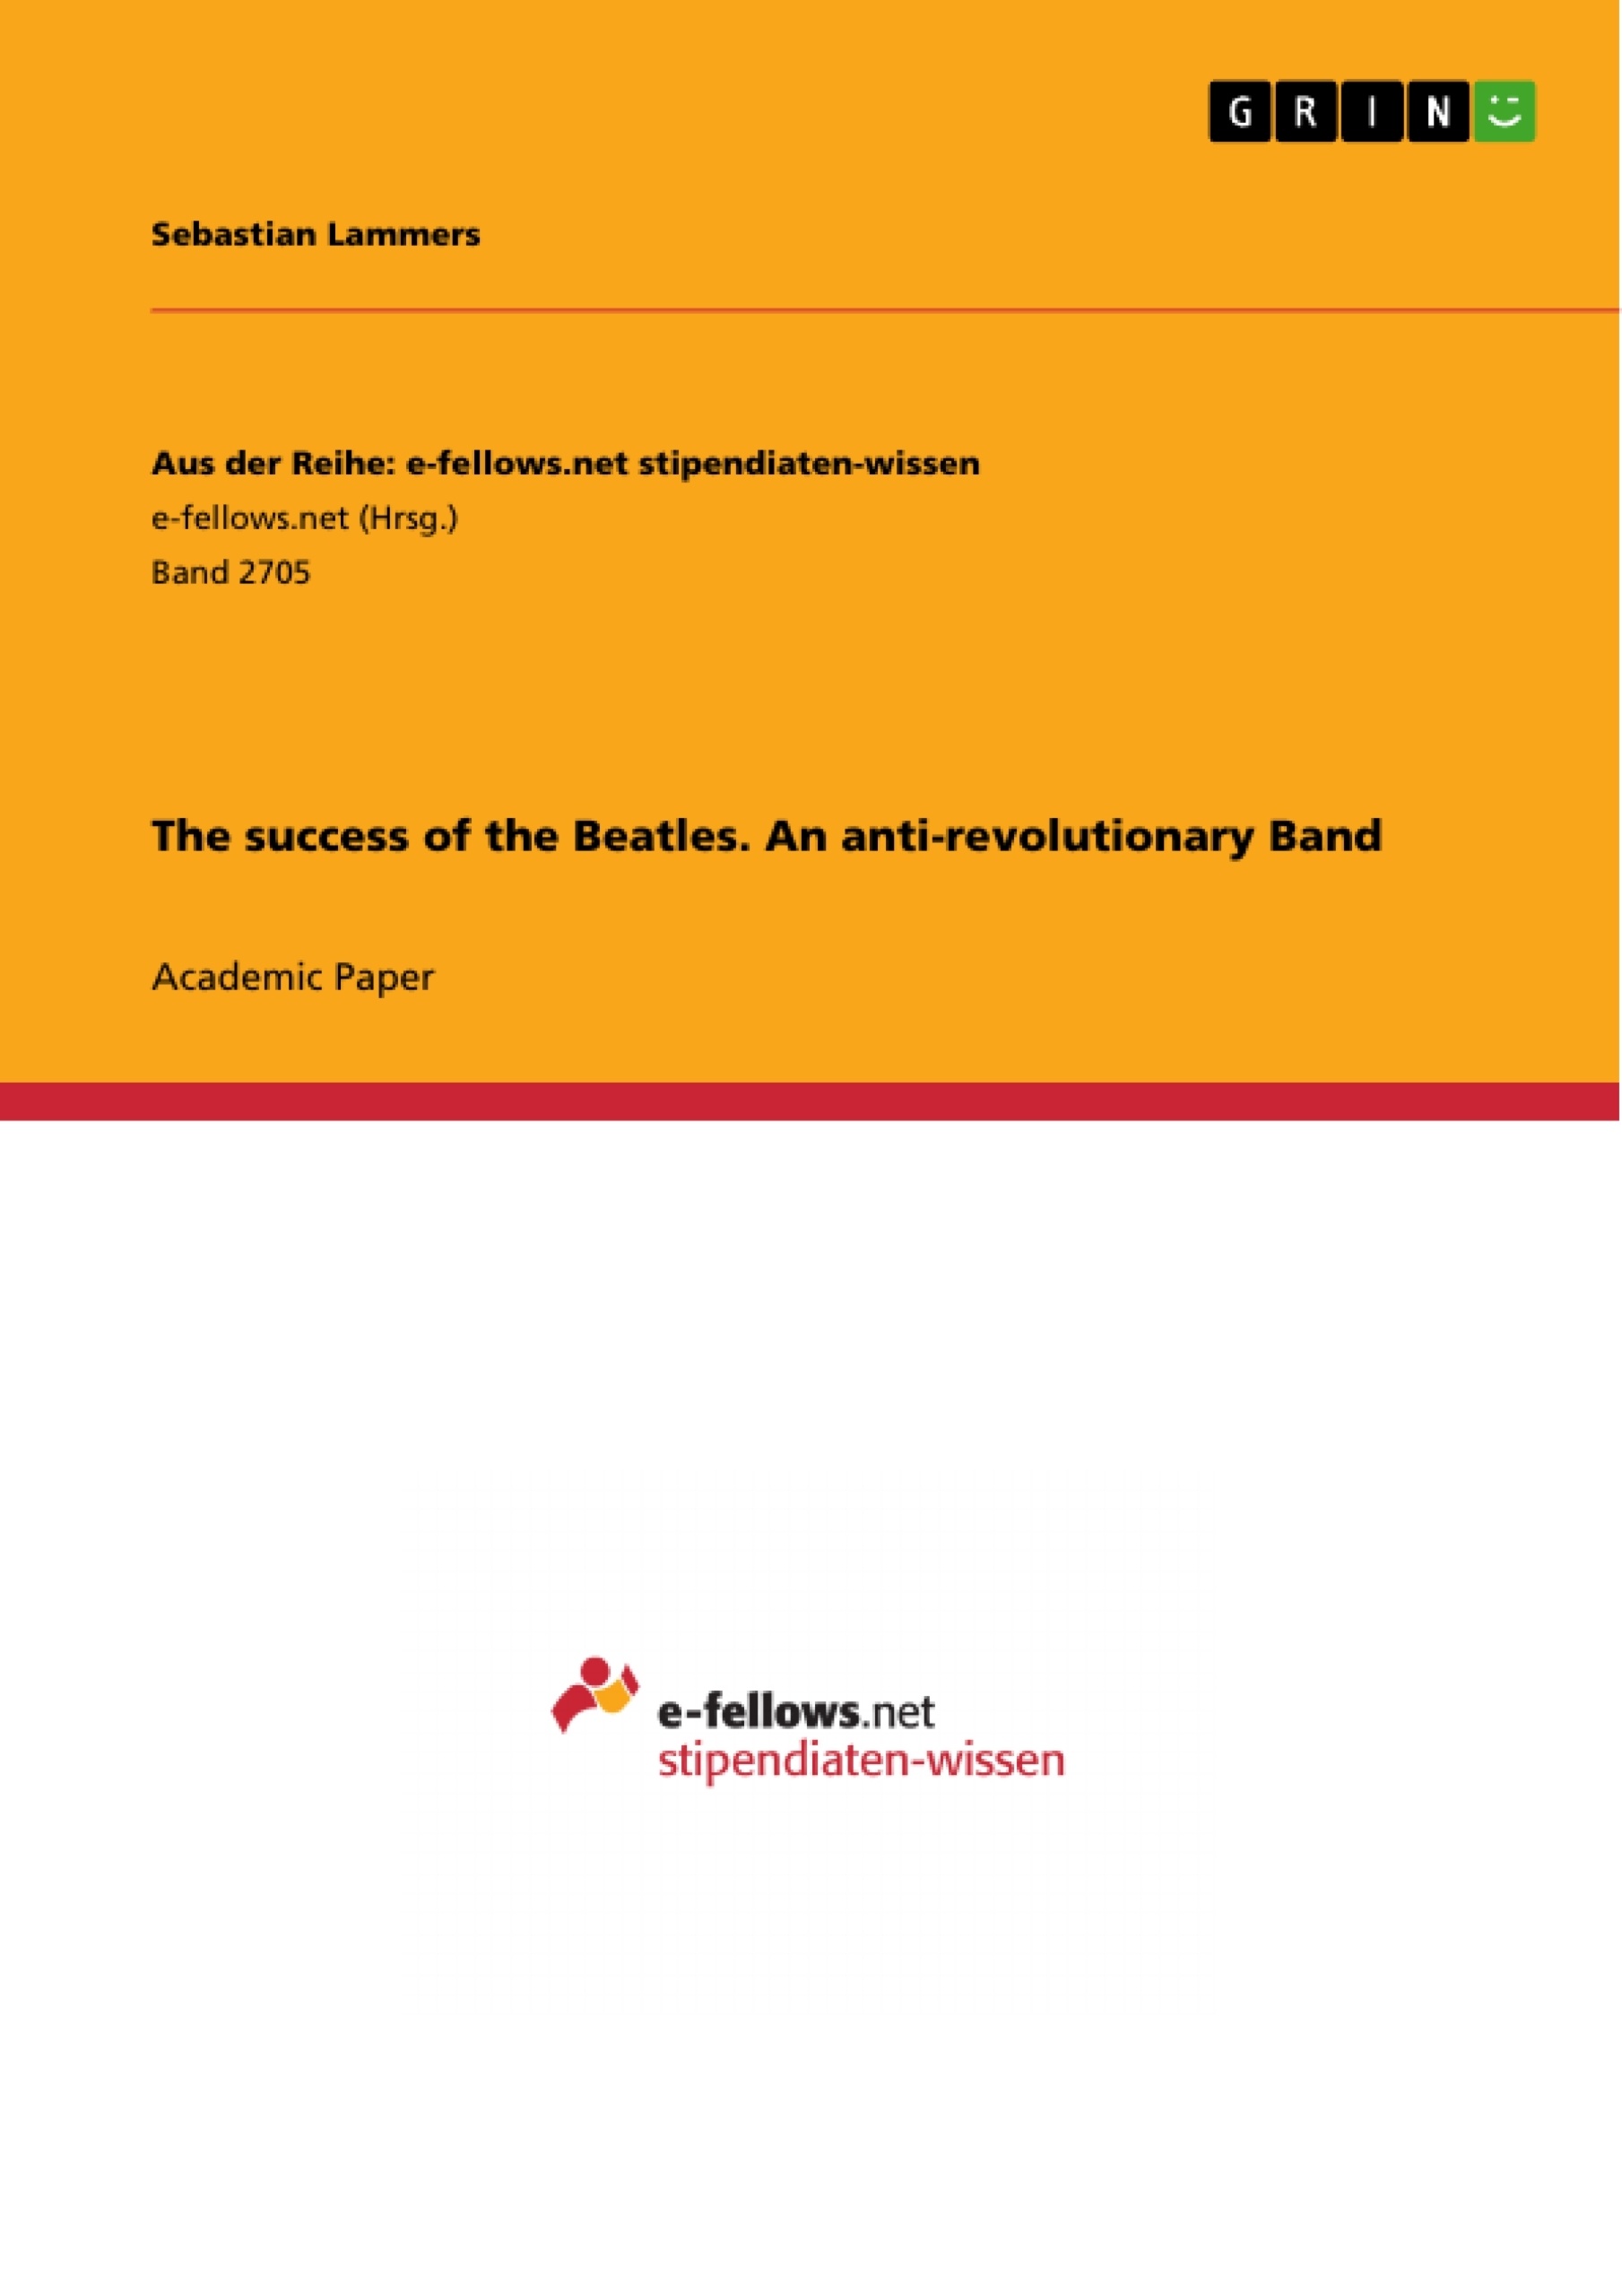 Title: The success of the Beatles. An anti-revolutionary Band